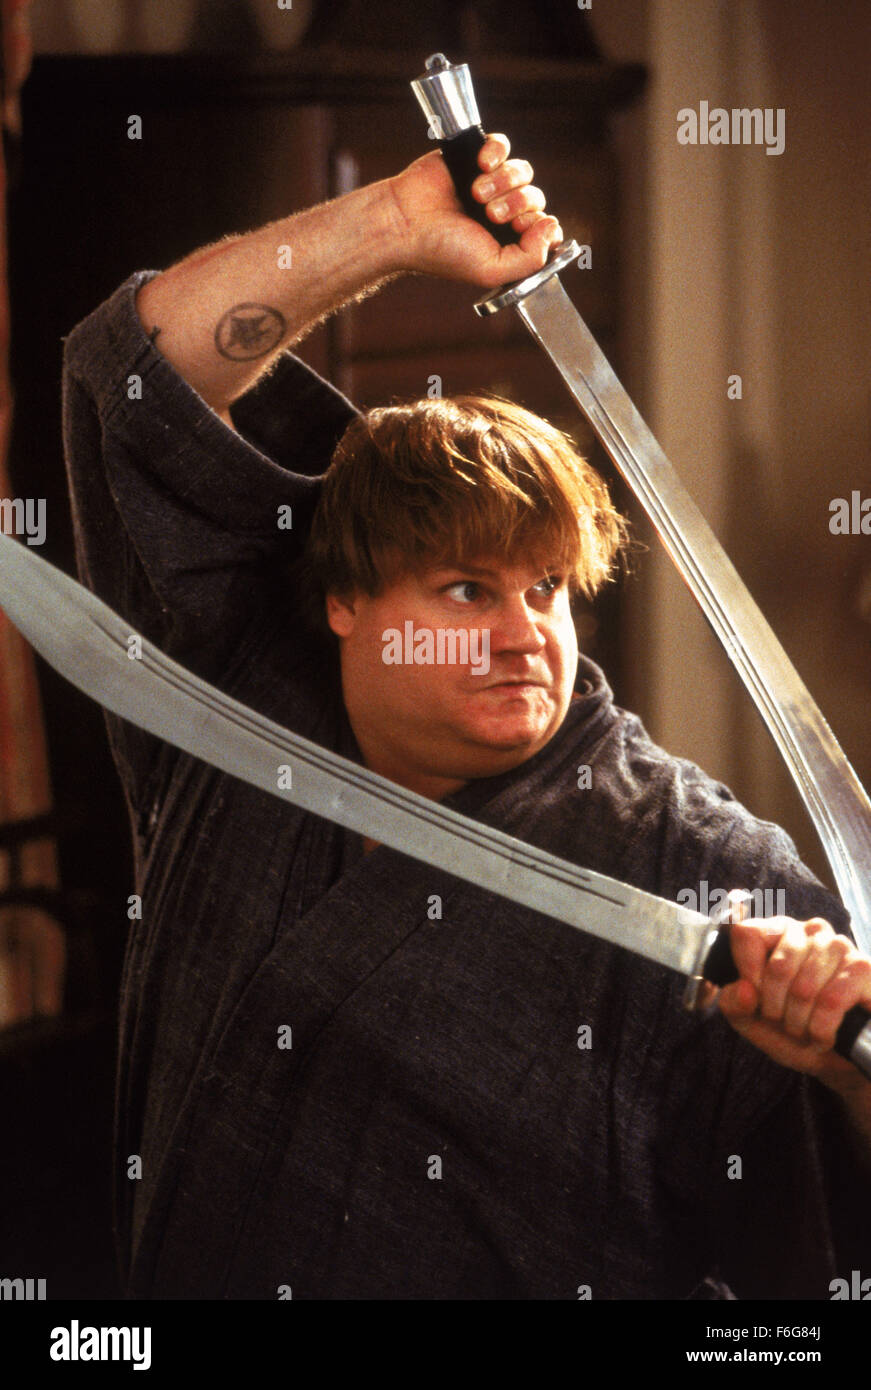 RELEASE DATE: January 17, 1997. MOVIE TITLE: Beverly Hills Ninja. STUDIO: Motion Picture Corporation of America (MPCA). PLOT: Following a ship wreck, a baby is rescued by a clan of Ninja warriors and raised by them as one of their own. But Haru, as he is called, never quite fits in, nor does he manage to make a worthy Ninja. However, the good-natured and persevering Haru, in his own bumbling way, and with some help from Gobei, manages to prove himself to be a winner in the end. PICTURED: CHRIS FARLEY as Haru. Stock Photo